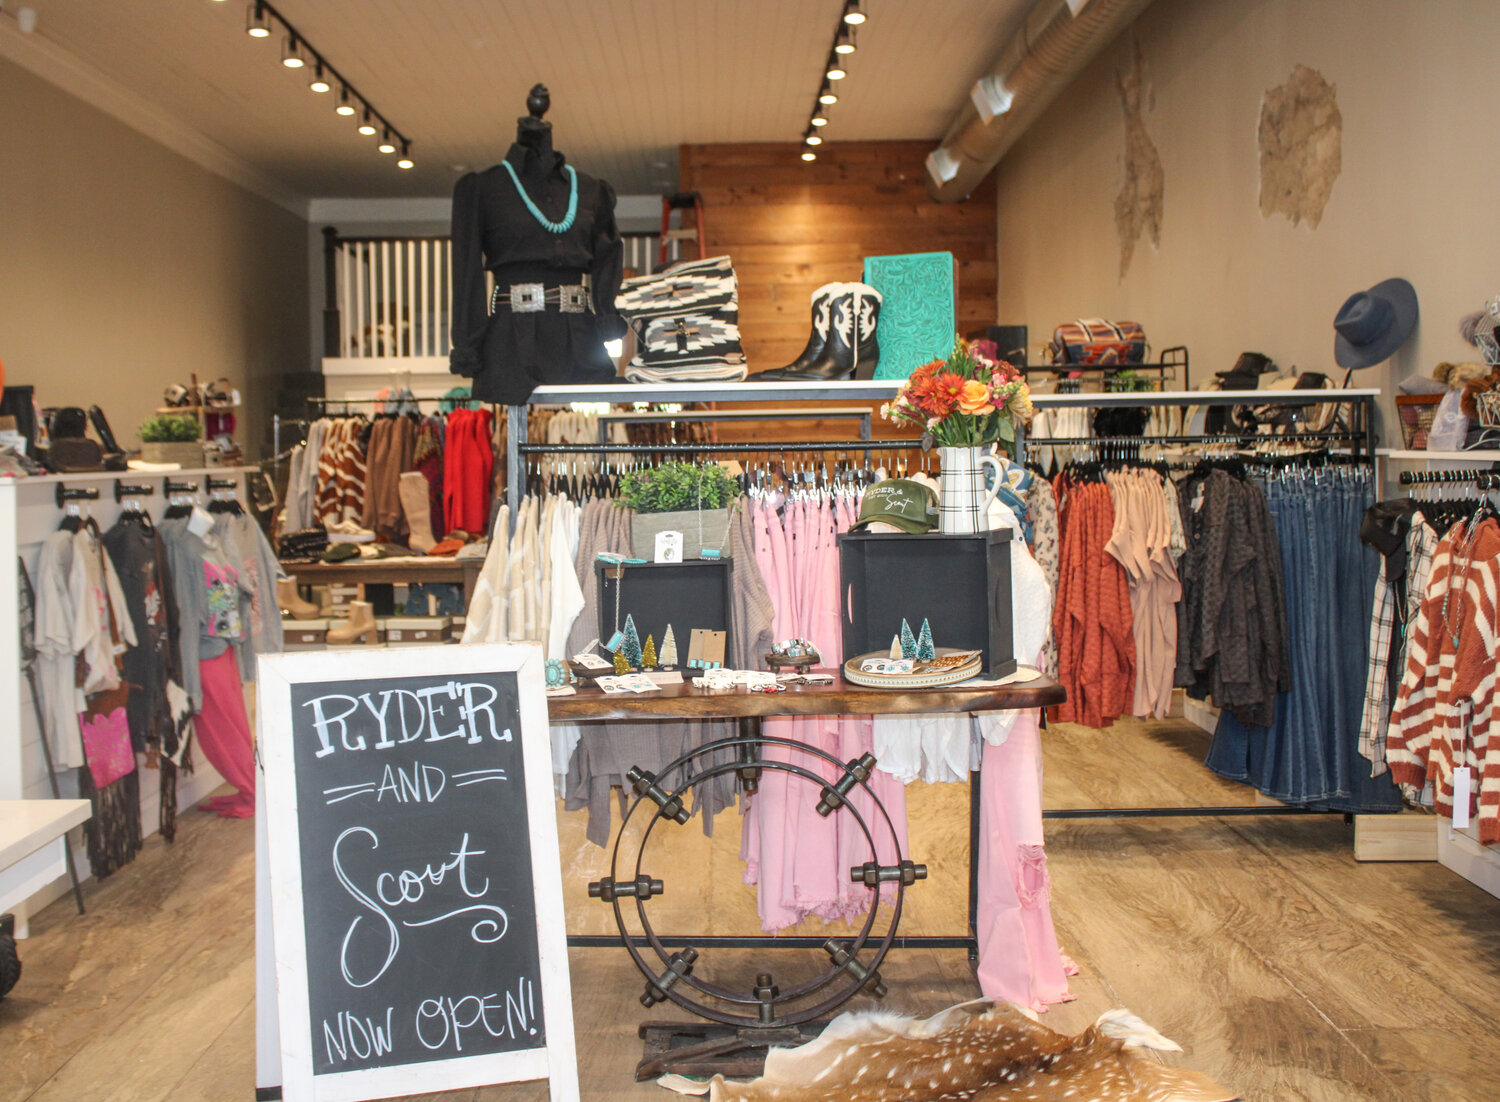 Hood County residents looking to westernize their wardrobe and put a little “yee-haw” in their step will welcome the addition of Ryder & Scout, Granbury’s newest Western boutique on the square.